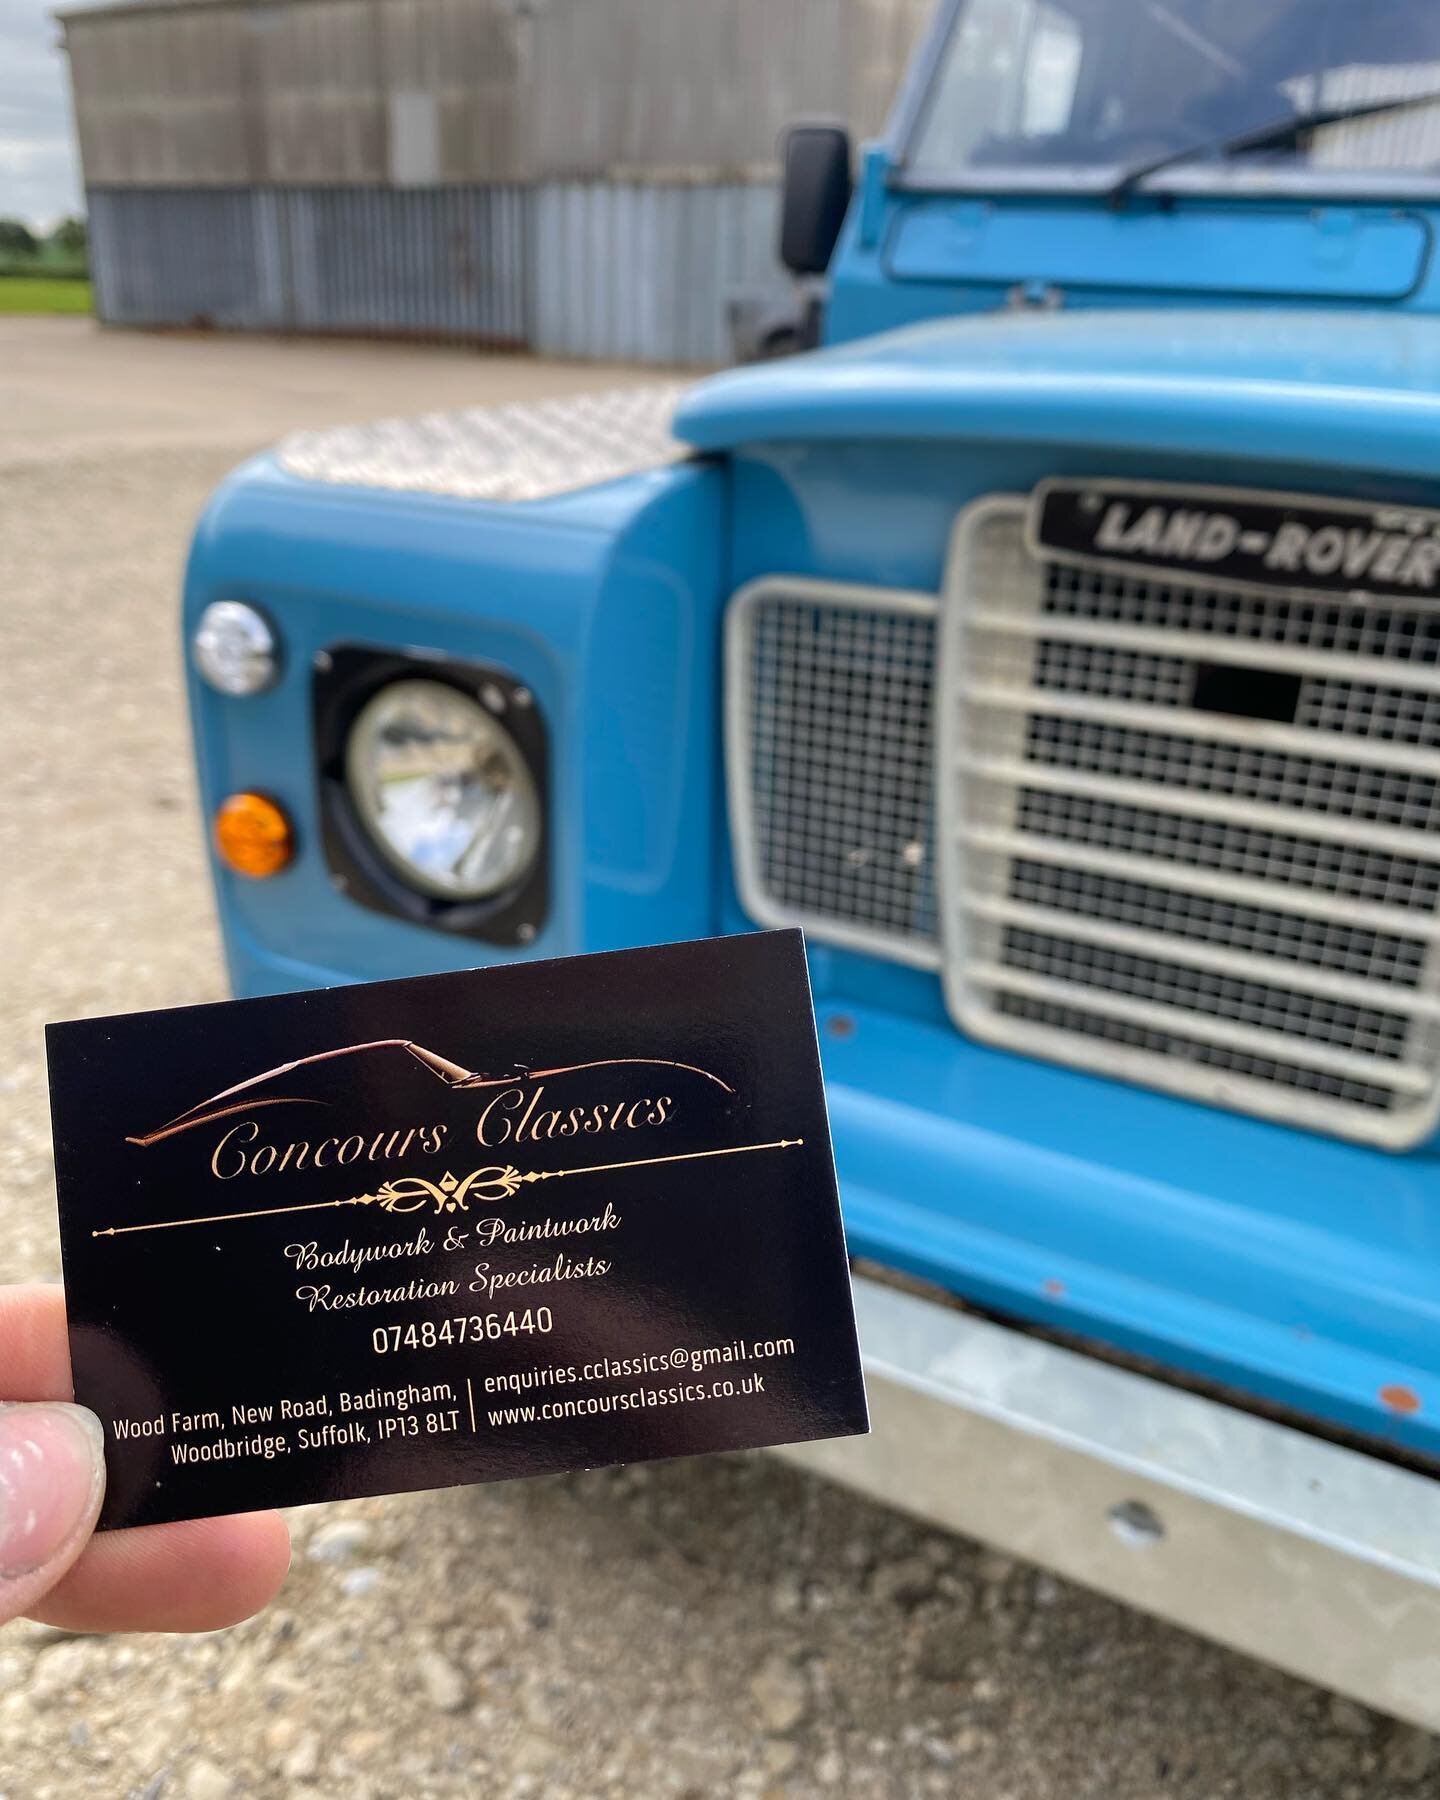 New Business cards in! 

Featuring our gorgeous little Series 3 Landrover in the background our new 
business cards really fit in, check them out! 

#landroverseries3 #landrover #series3 #landroverrestoration